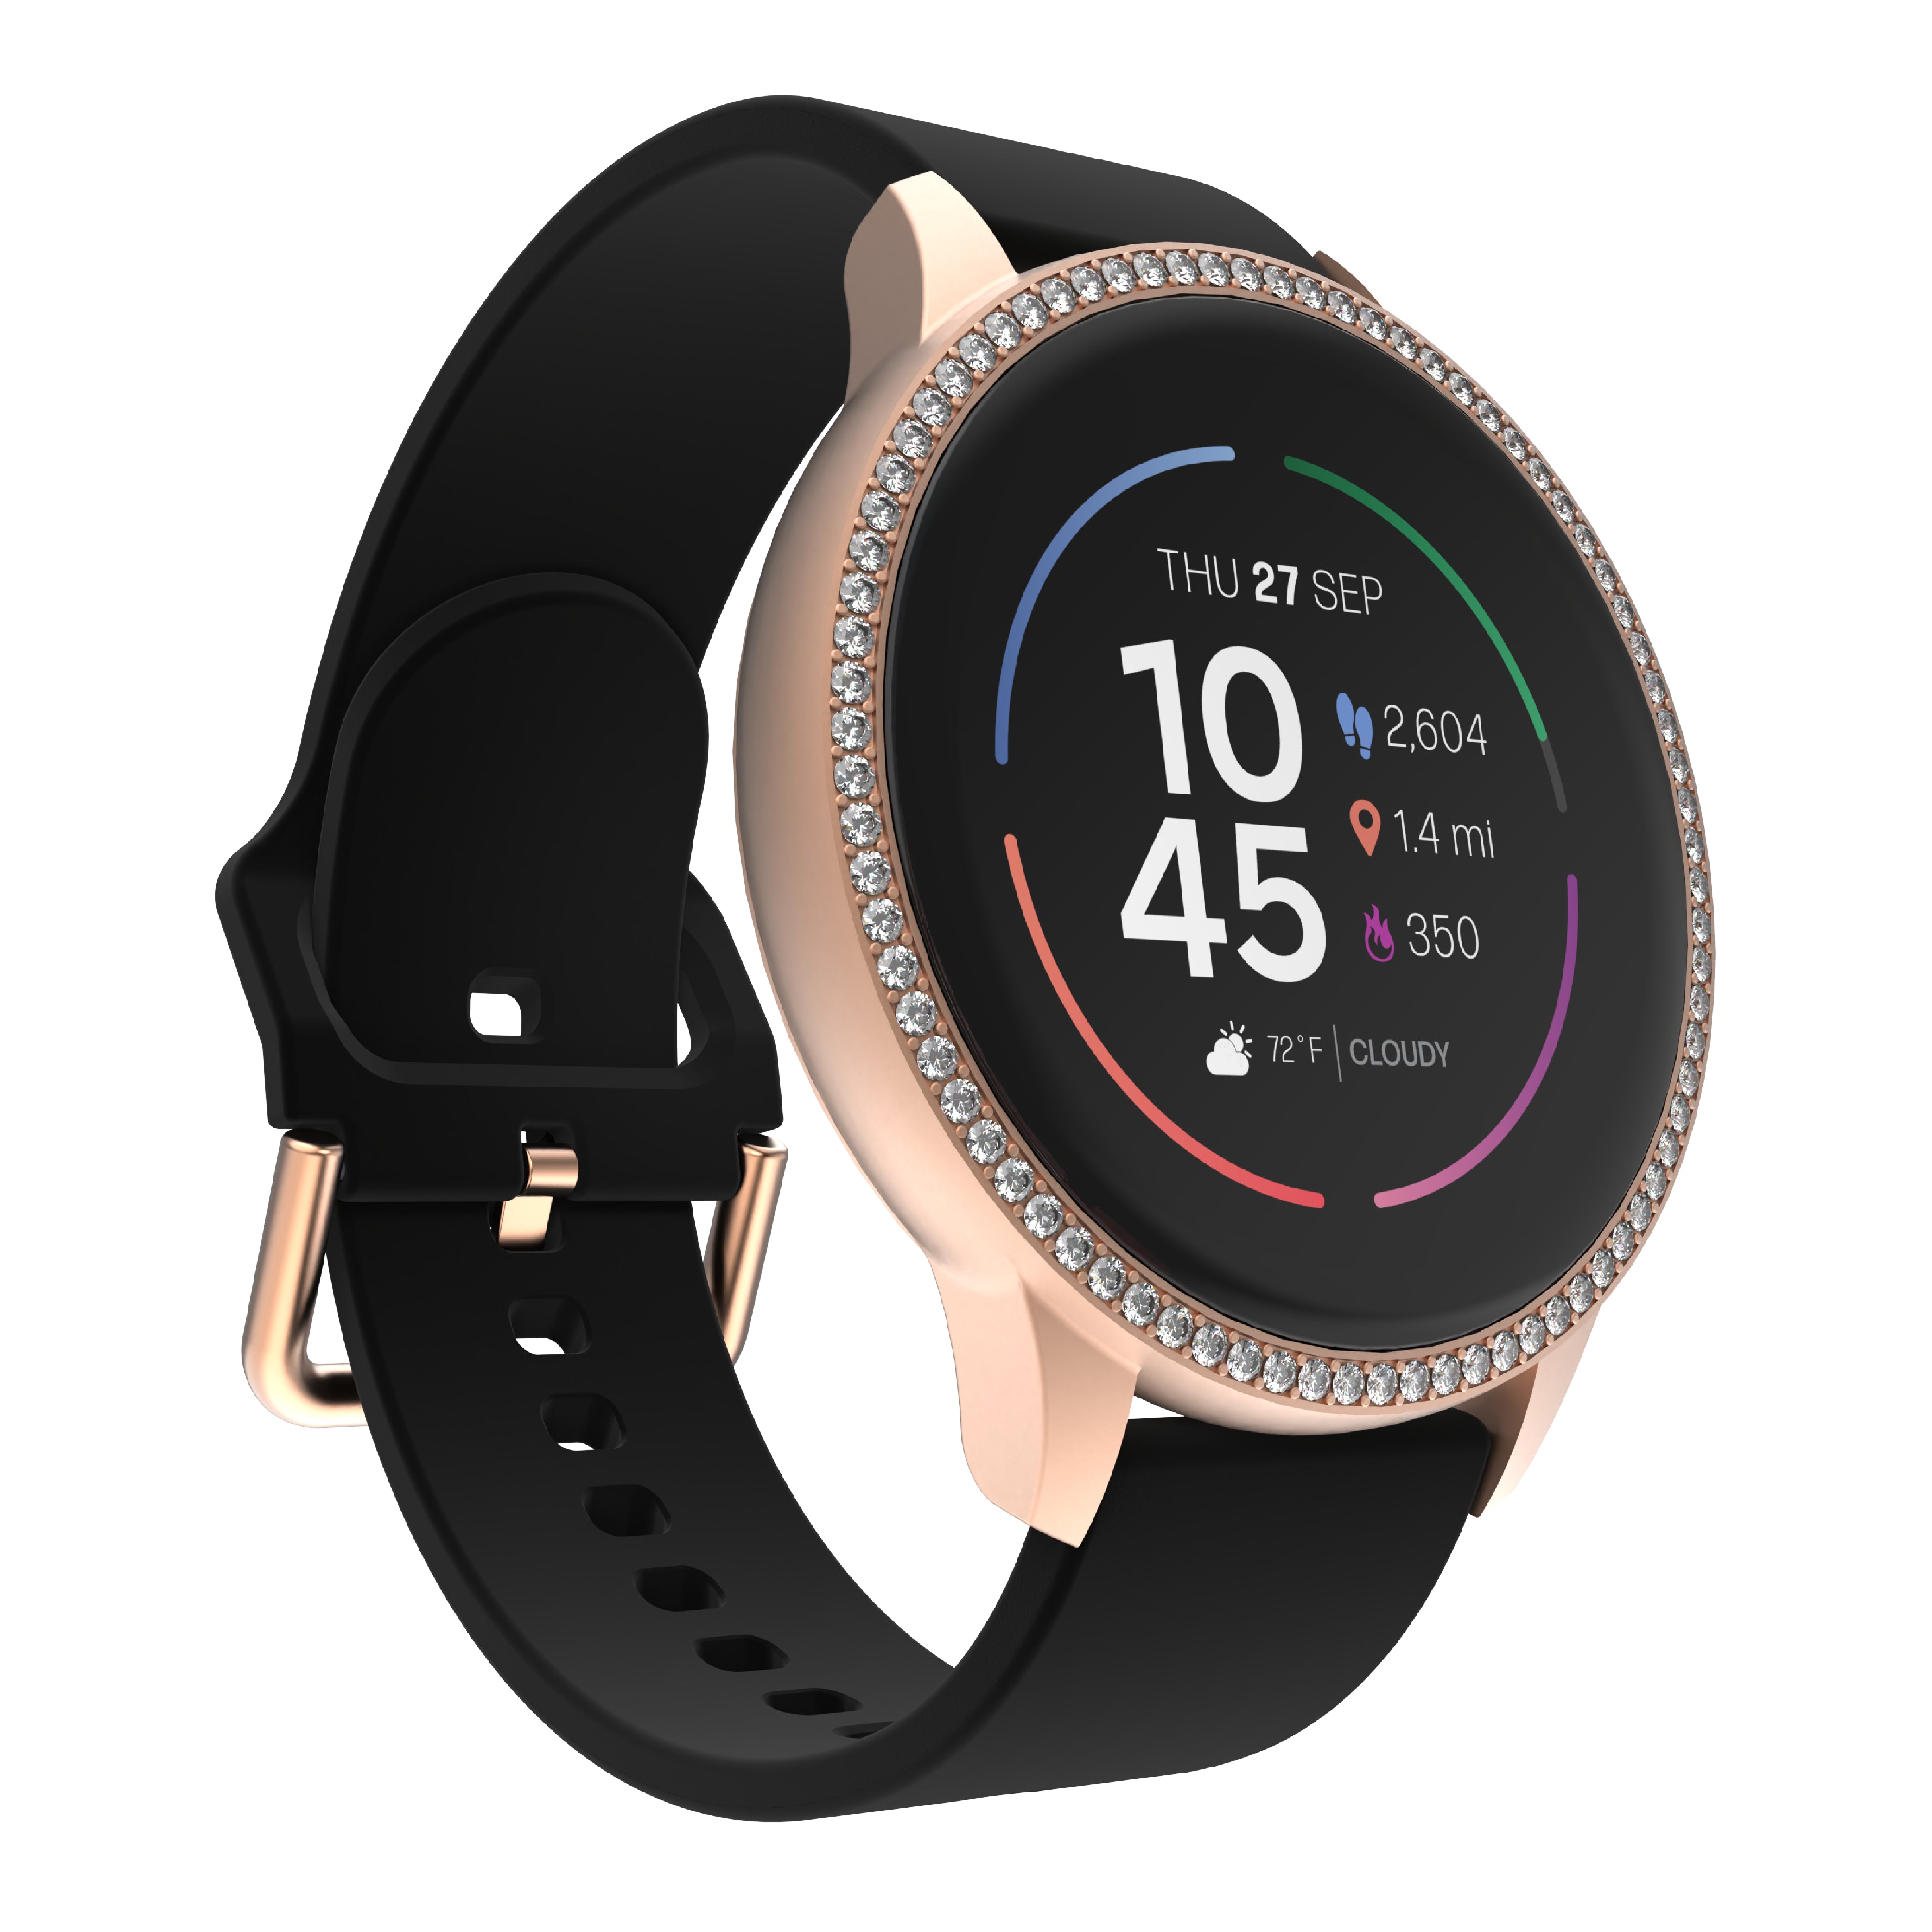 Active Smartwatch Accessory Bands for Google Pixel Watch 2 & Google Pixel  Watch | Shop Smartwatch Accessories for Google Pixel Watch 2 and Google  Pixel Watch